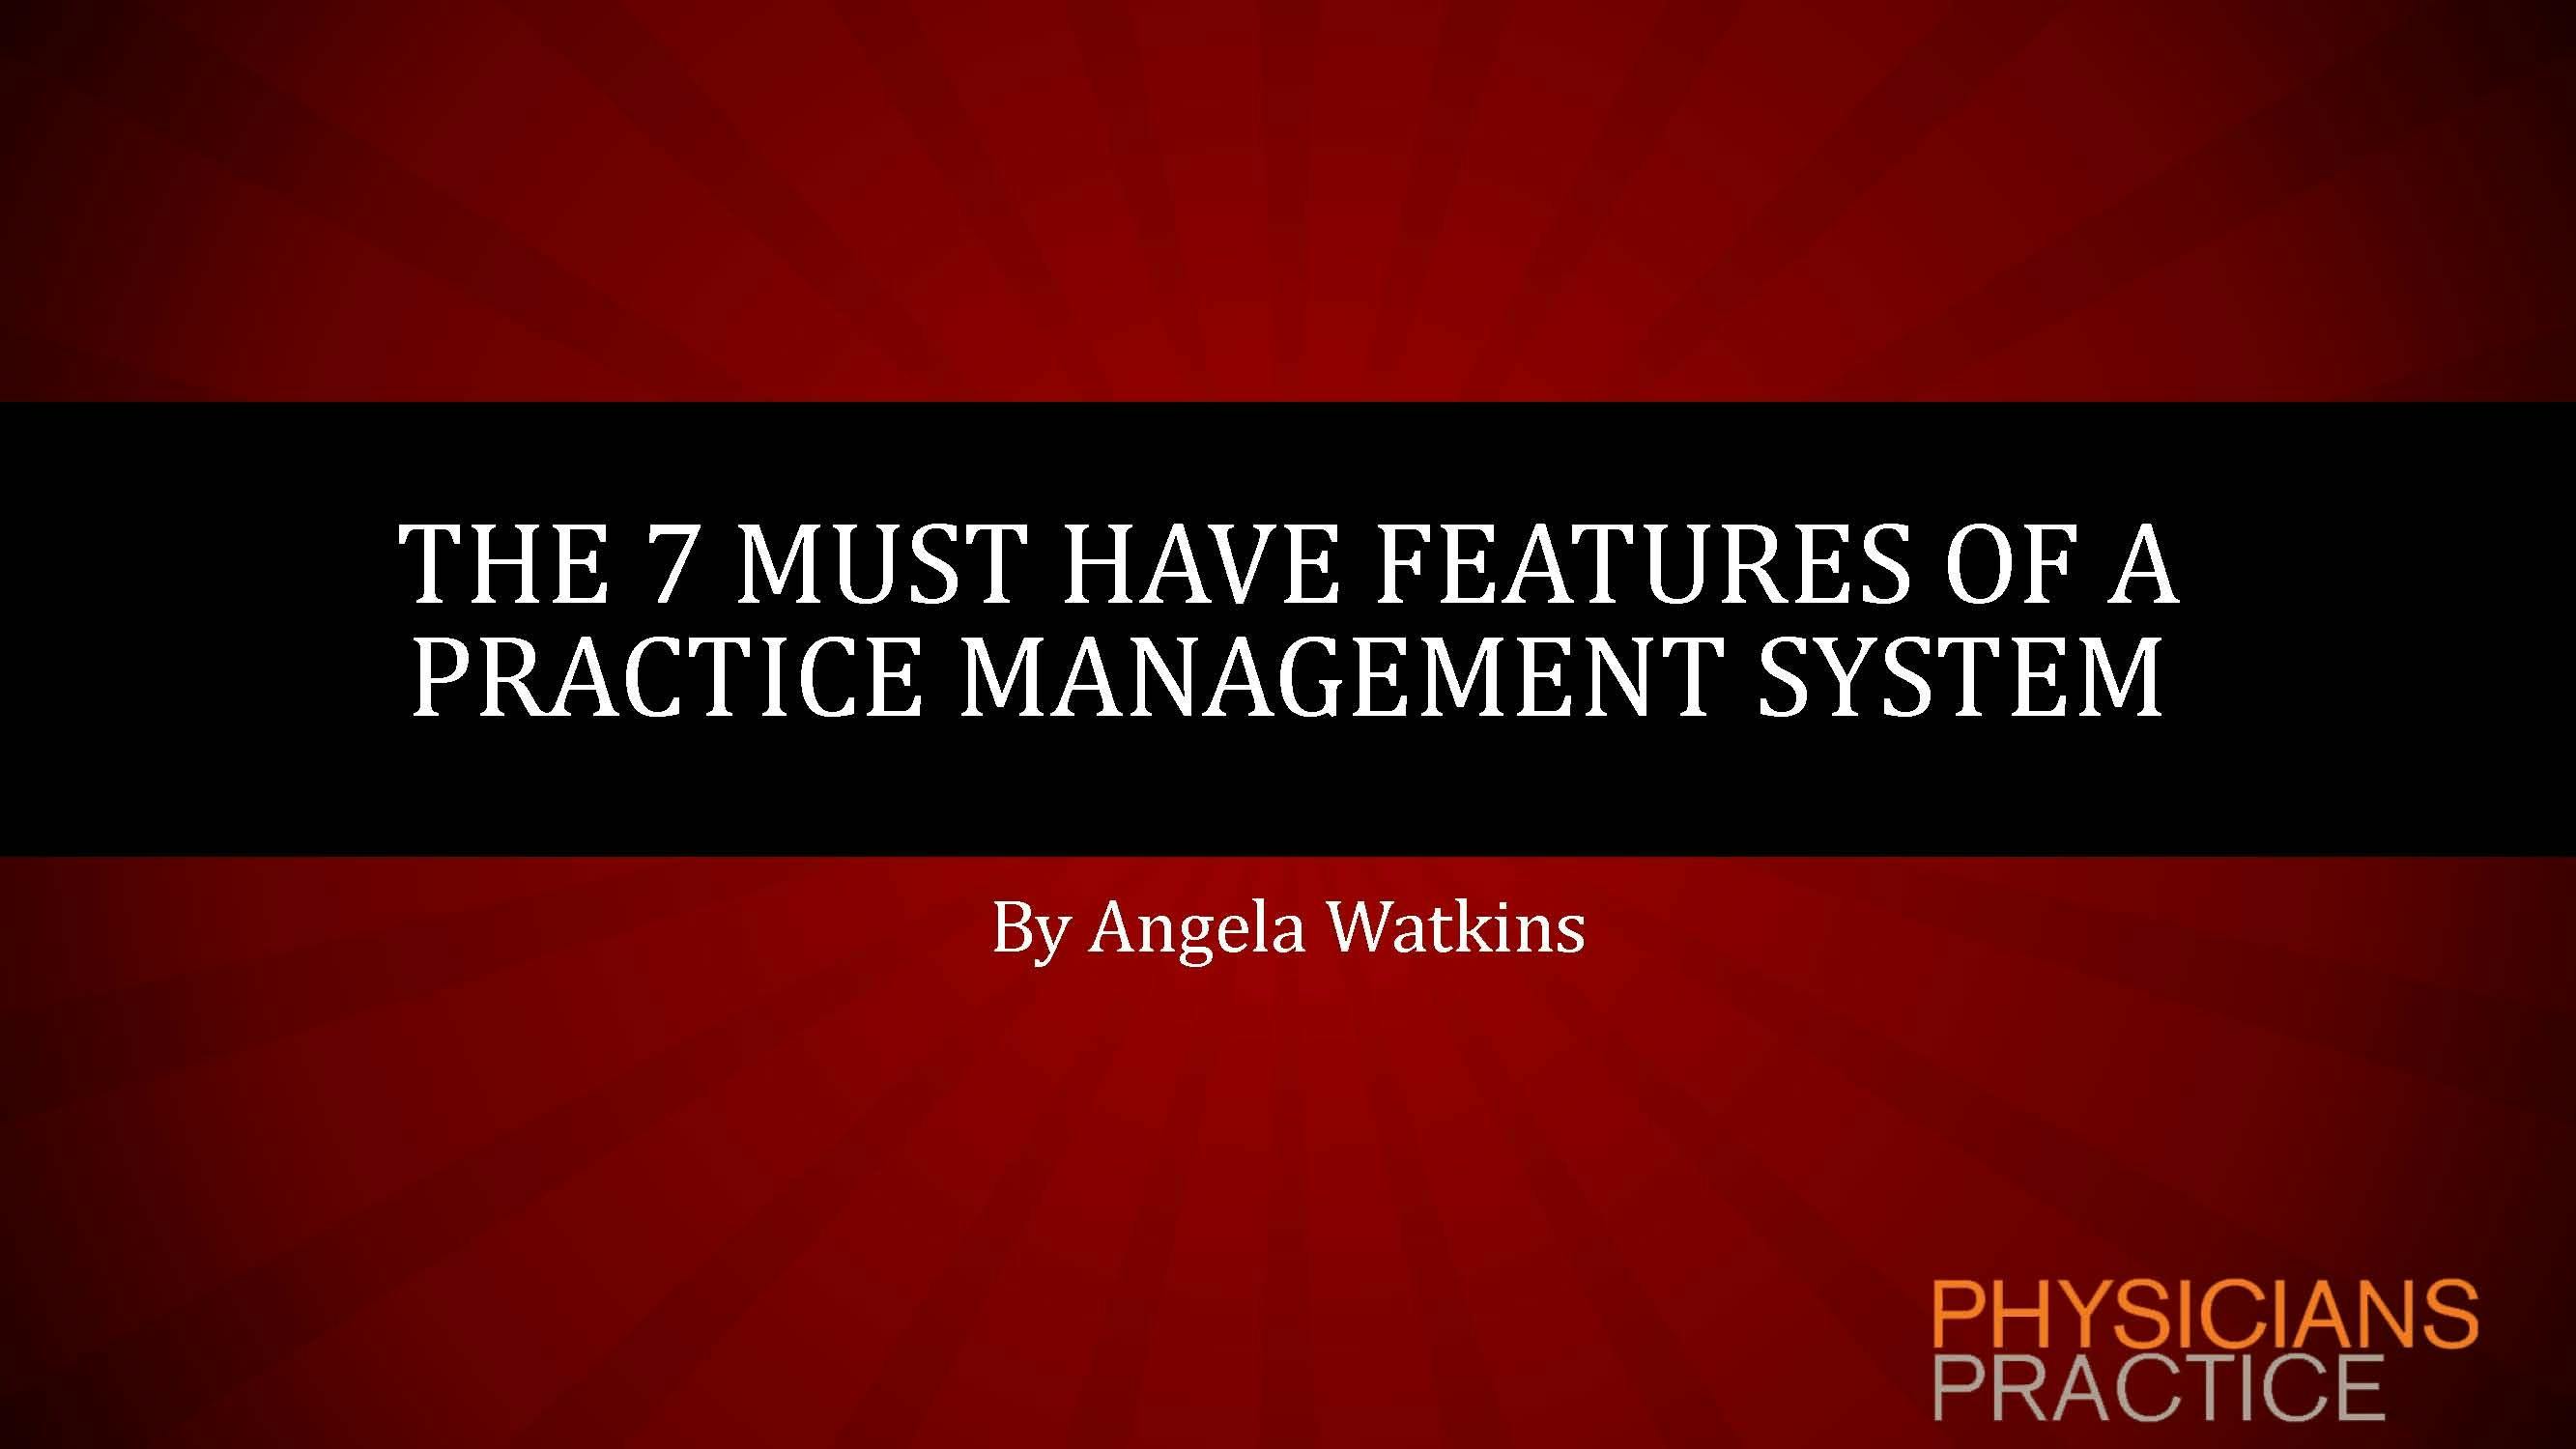 The 7 Must Have Features of a Practice Management System